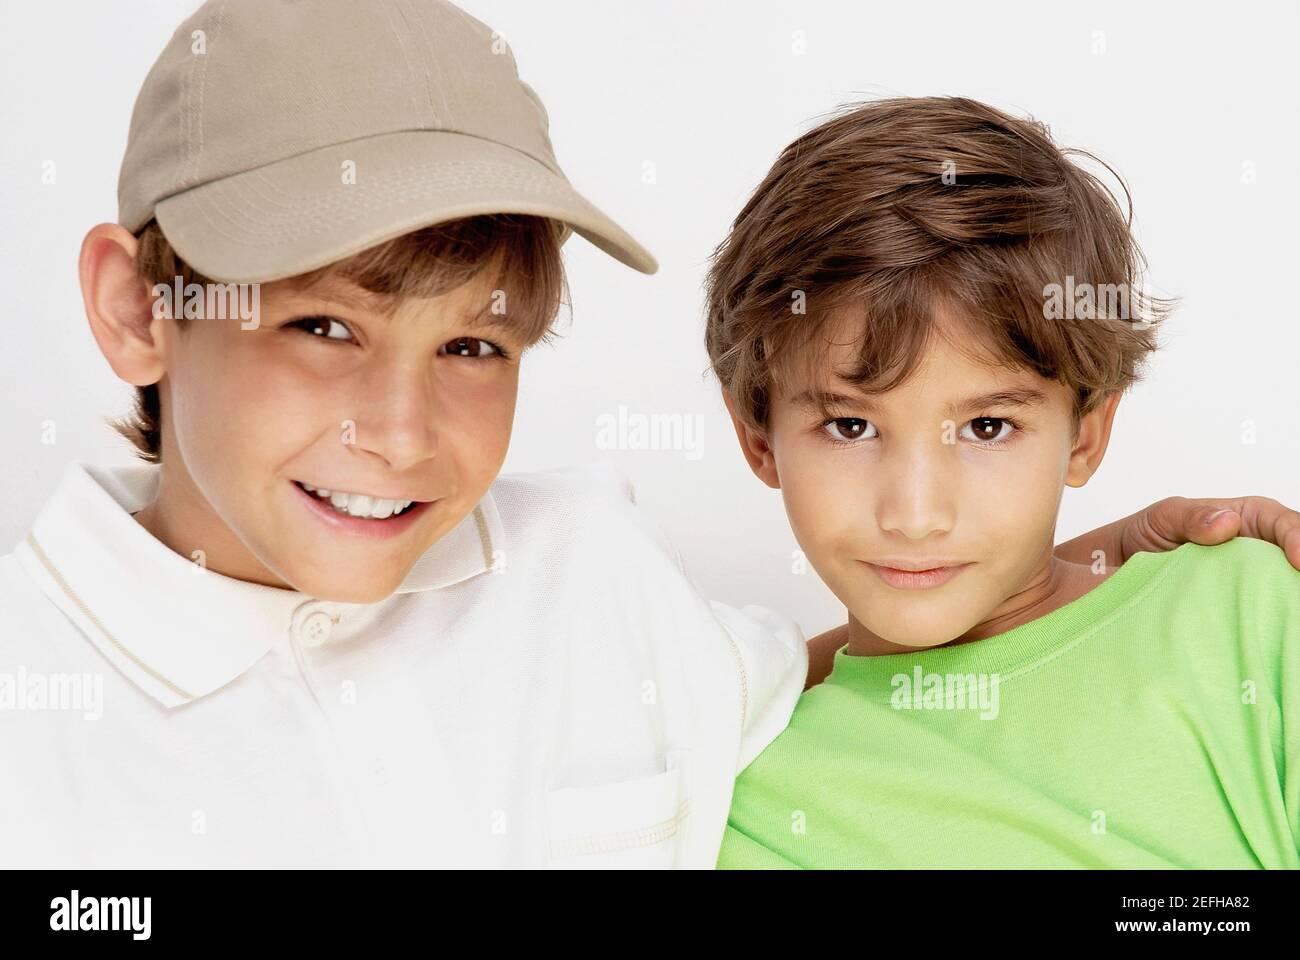 Portrait of two boys smiling Stock Photo